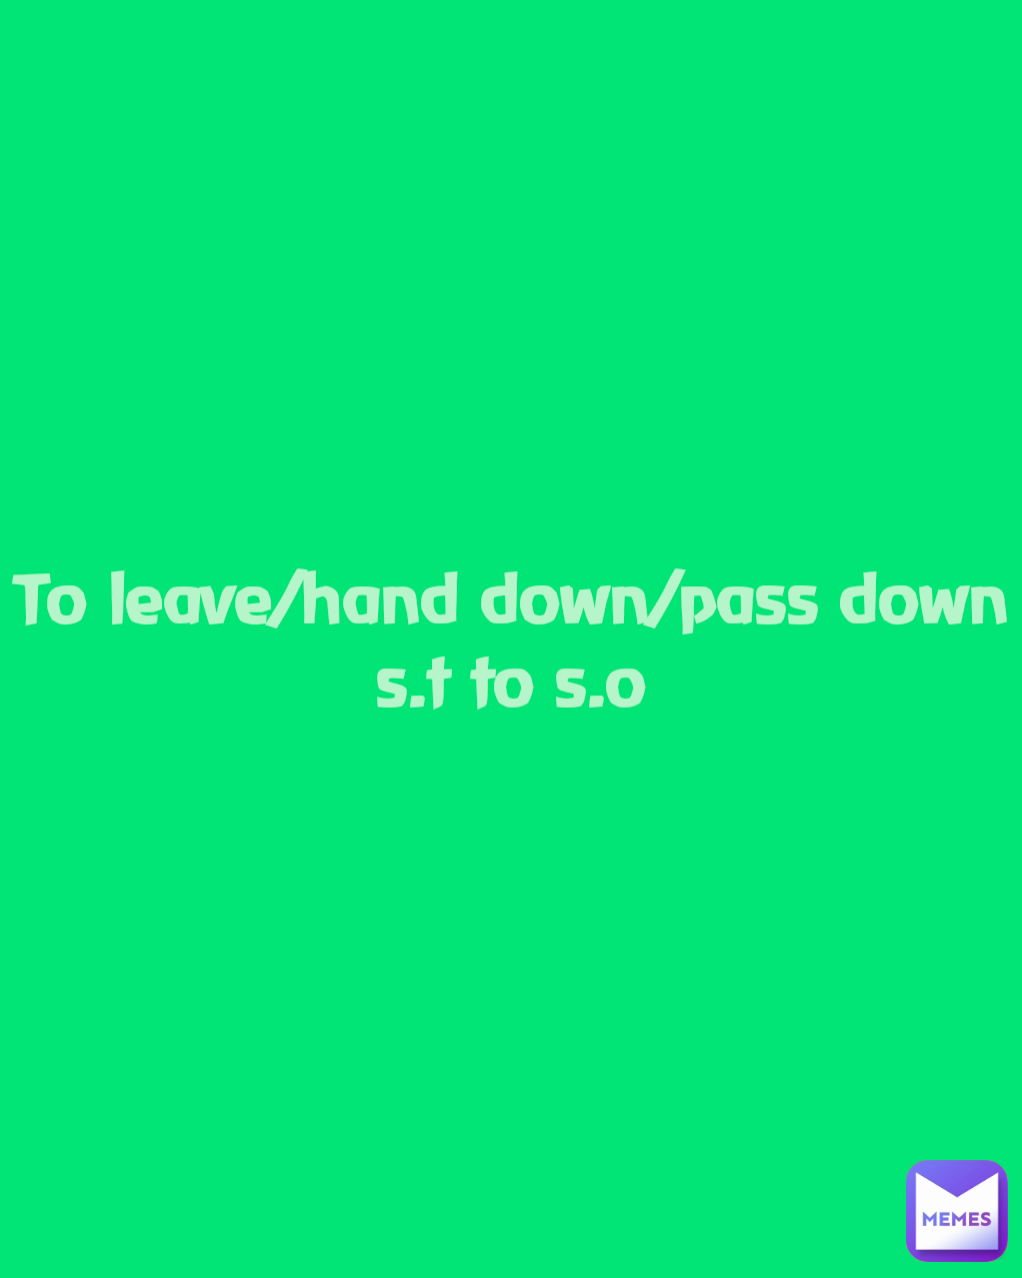 To leave/hand down/pass down s.t to s.o